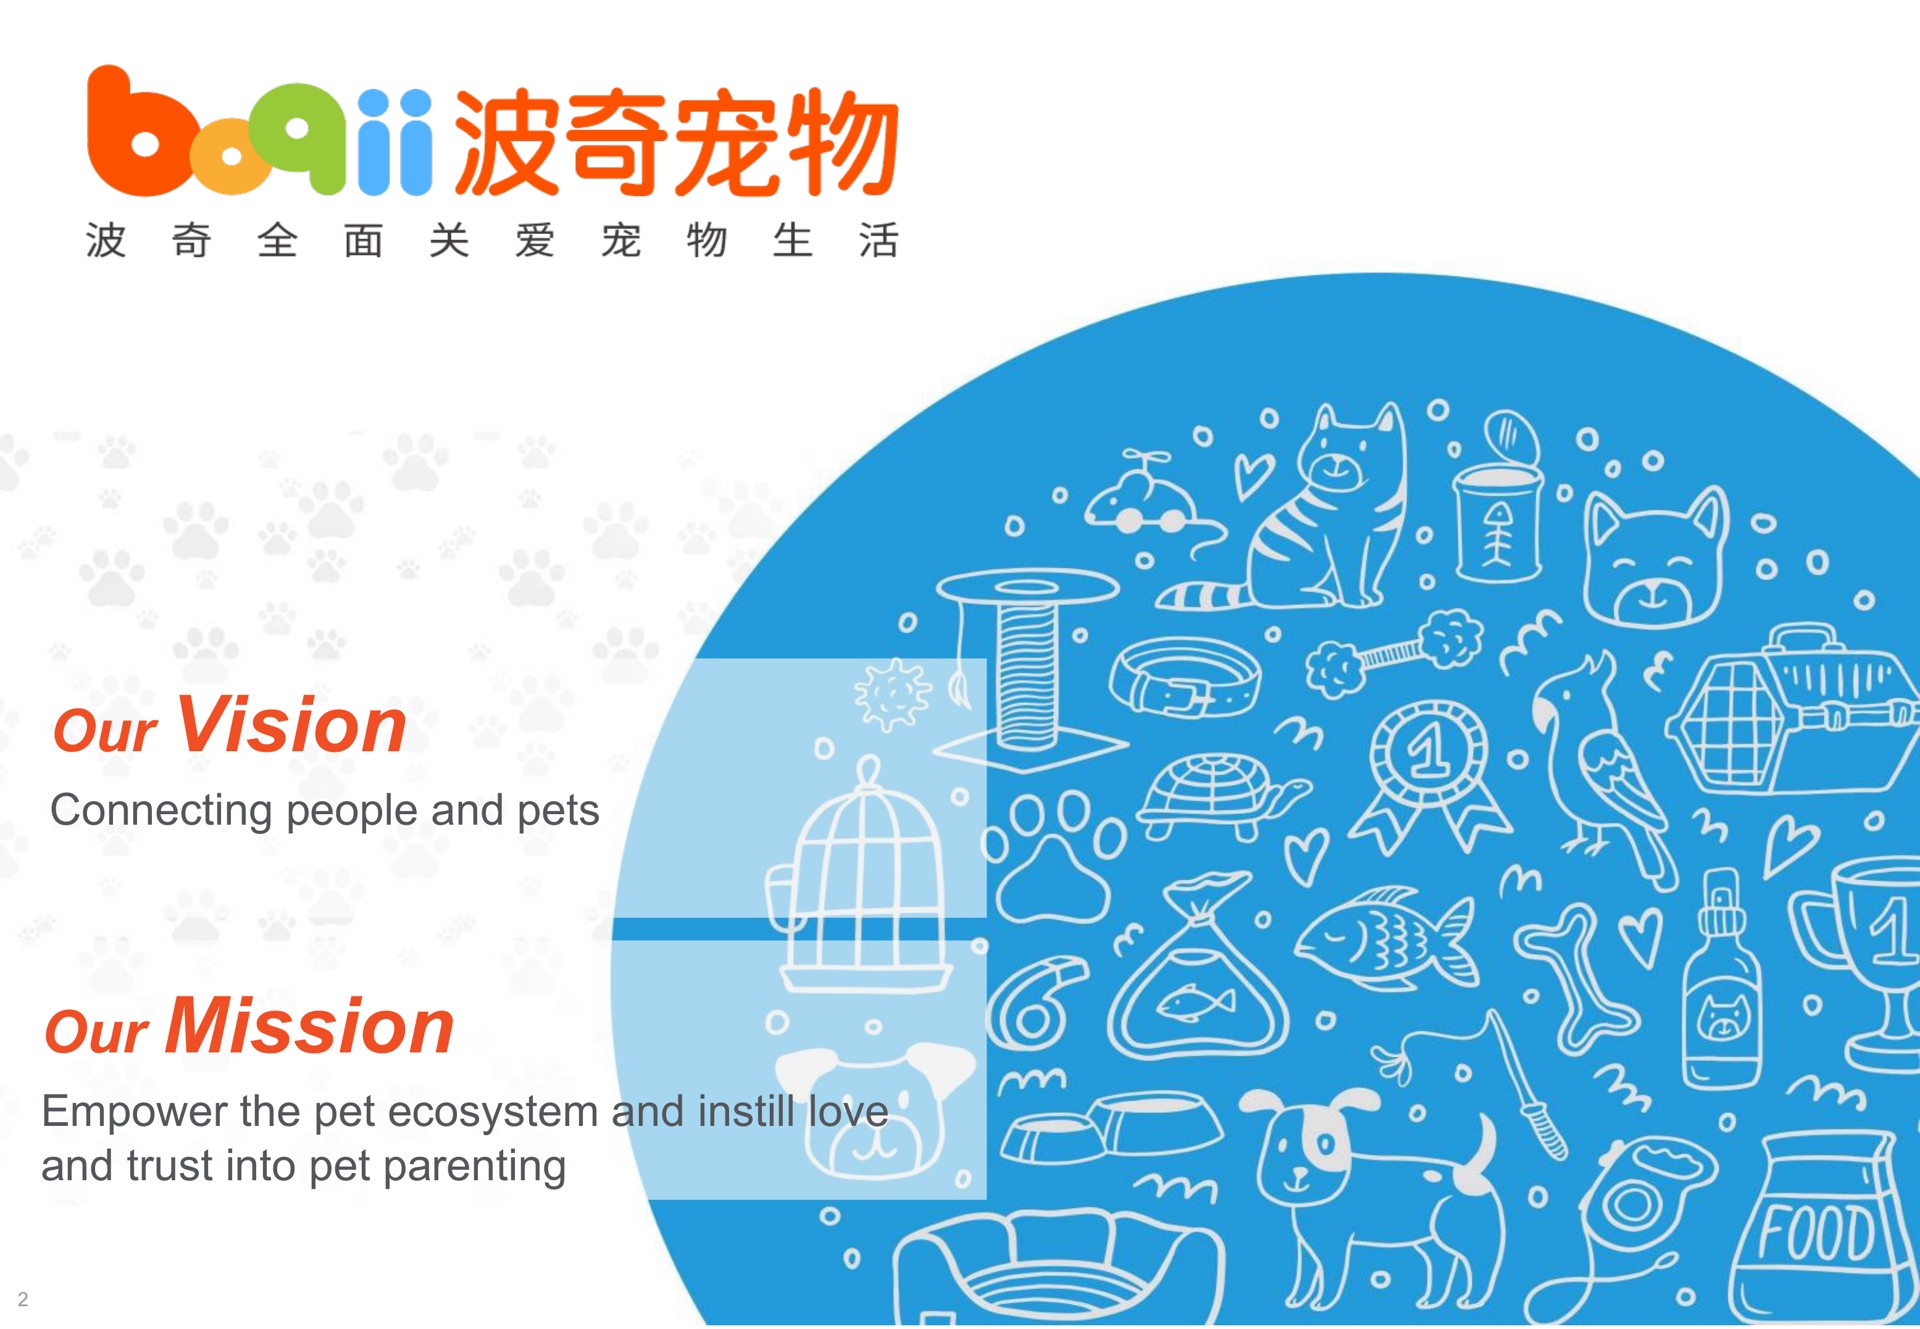 our vision connecting people and pets our mission empower the pet ecosystem and instill love and trust into pet parenting sion ion miss | Boqii Holding